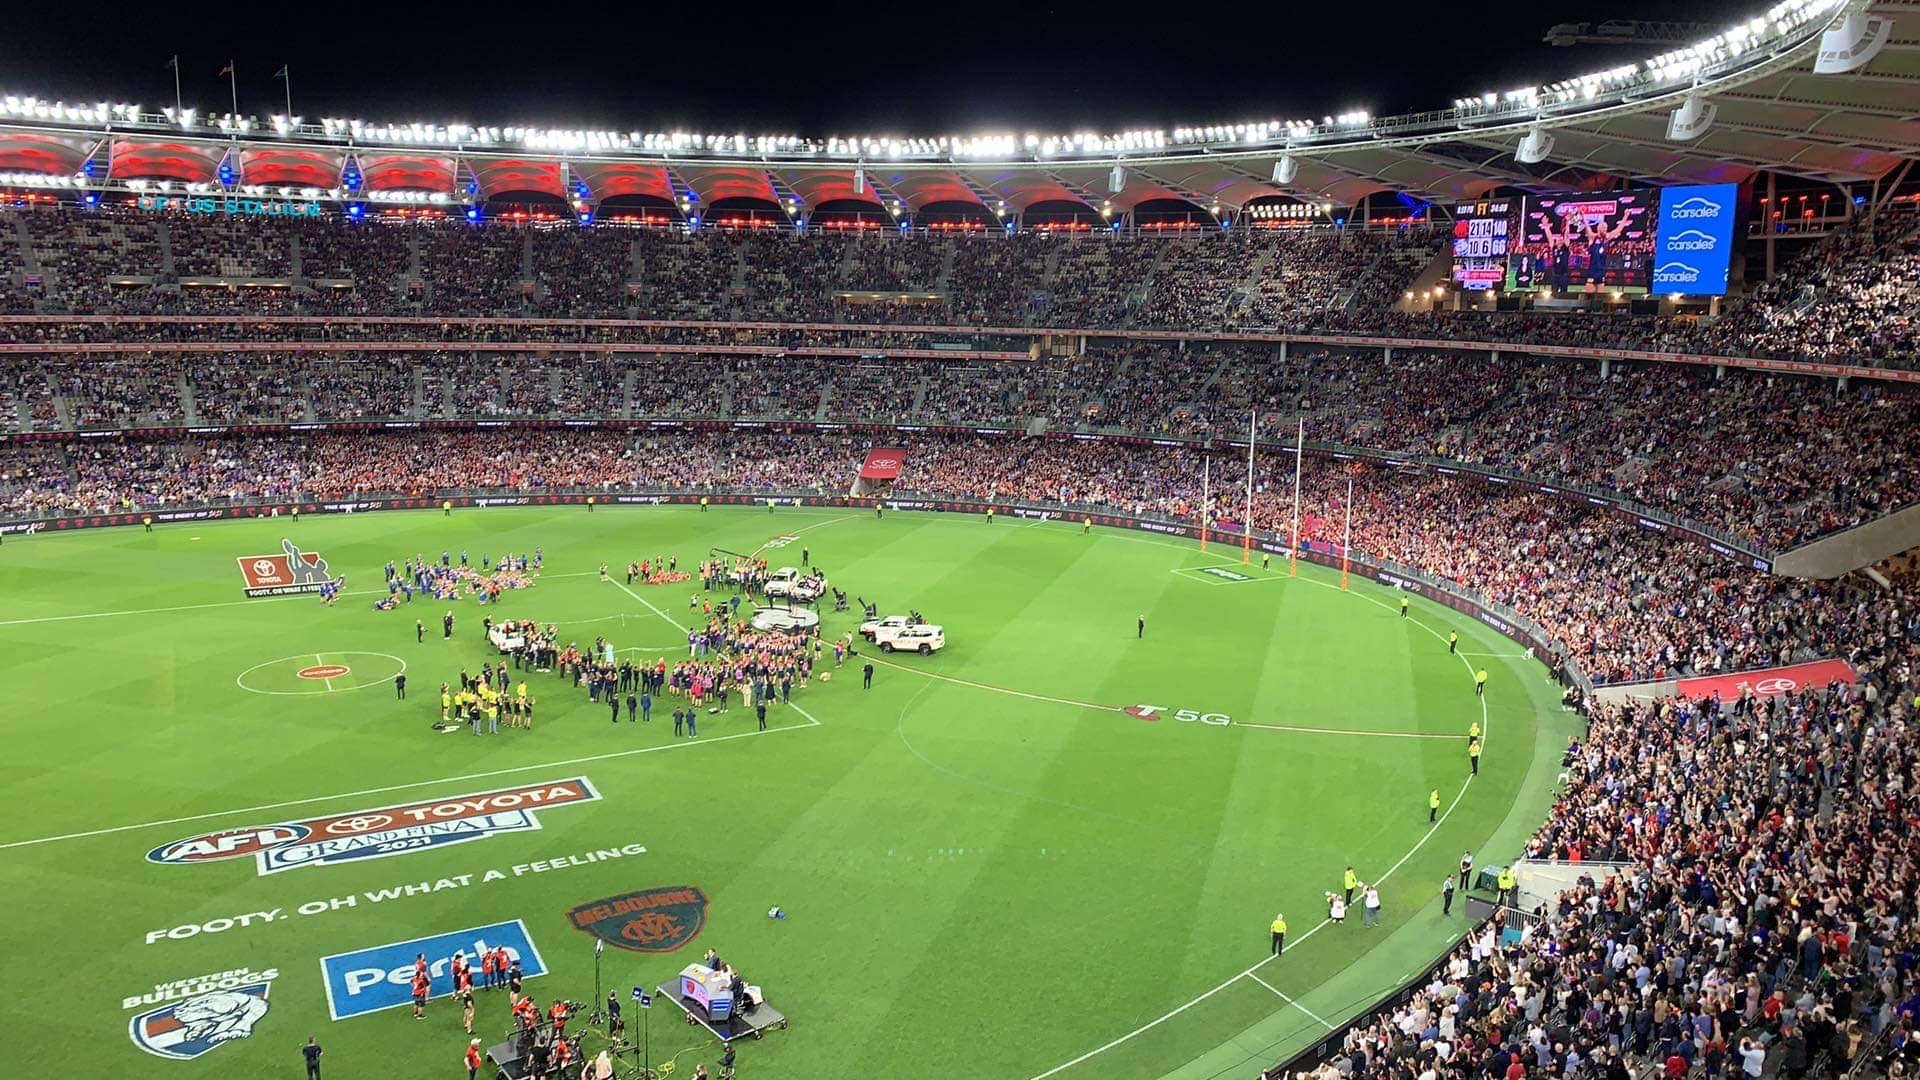 Perth's brand new Optus Stadium is hosting the AFL final